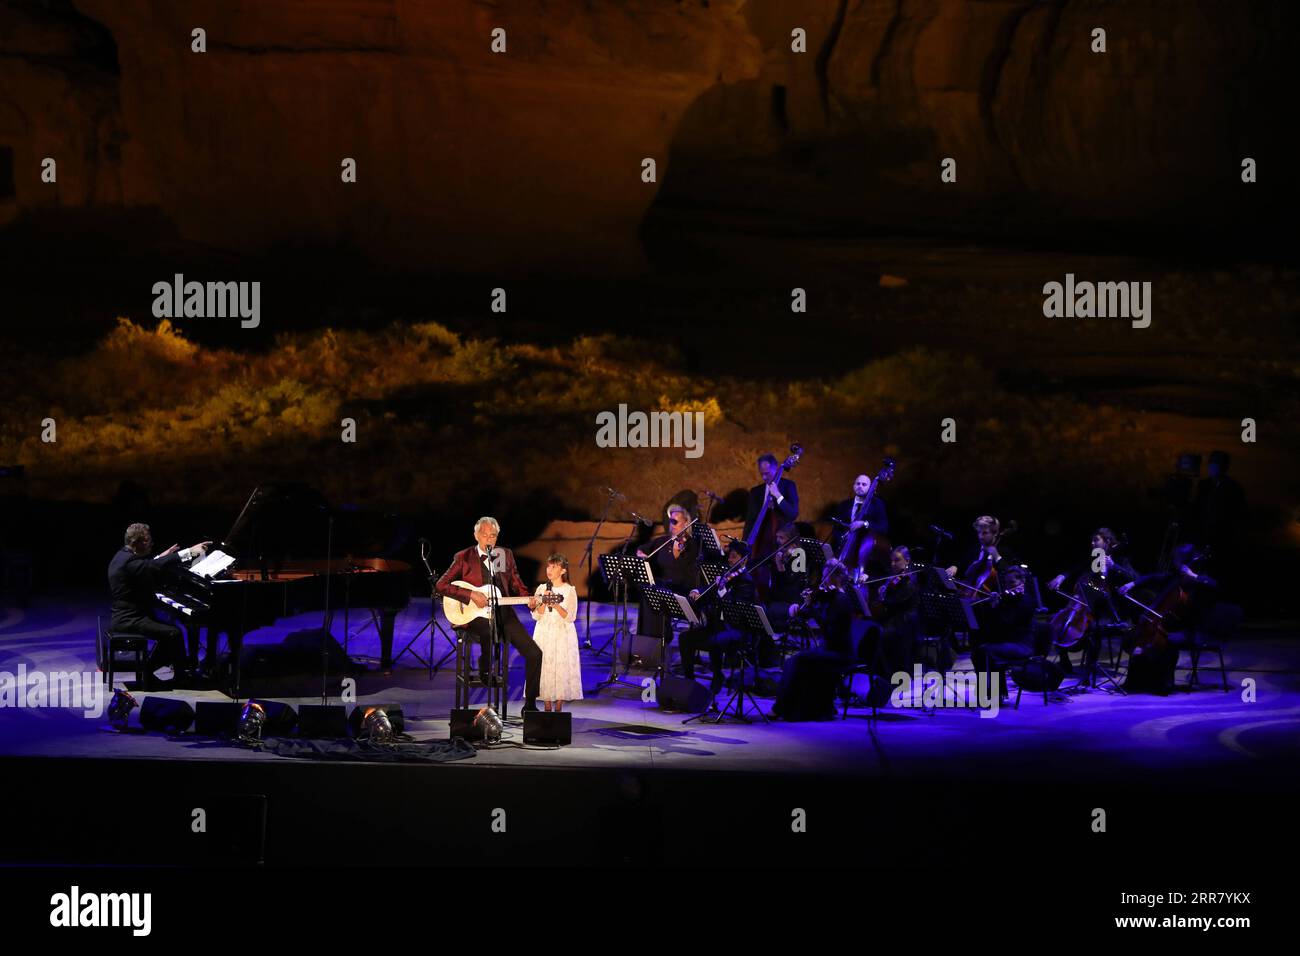 210409 -- AL ULA, April 9, 2021 -- Italian tenor Andrea Bocelli performs with his daughter Virginia at a concert in Al-Ula, northwestern Saudi Arabia, April 8, 2021. The Italian legendary tenor Andrea Bocelli on Thursday evening performed within the walls of Hegra, Saudi Arabia s first UNESCO World Heritage Site. TO GO WITH Italian tenor Bocelli performs in Saudi s world heritage site /Handout via Xinhua SAUDI ARABIA-AL ULA-ANDREA BOCELLI-CONCERT ThexRoyalxCommissionxforxAlUla PUBLICATIONxNOTxINxCHN Stock Photo